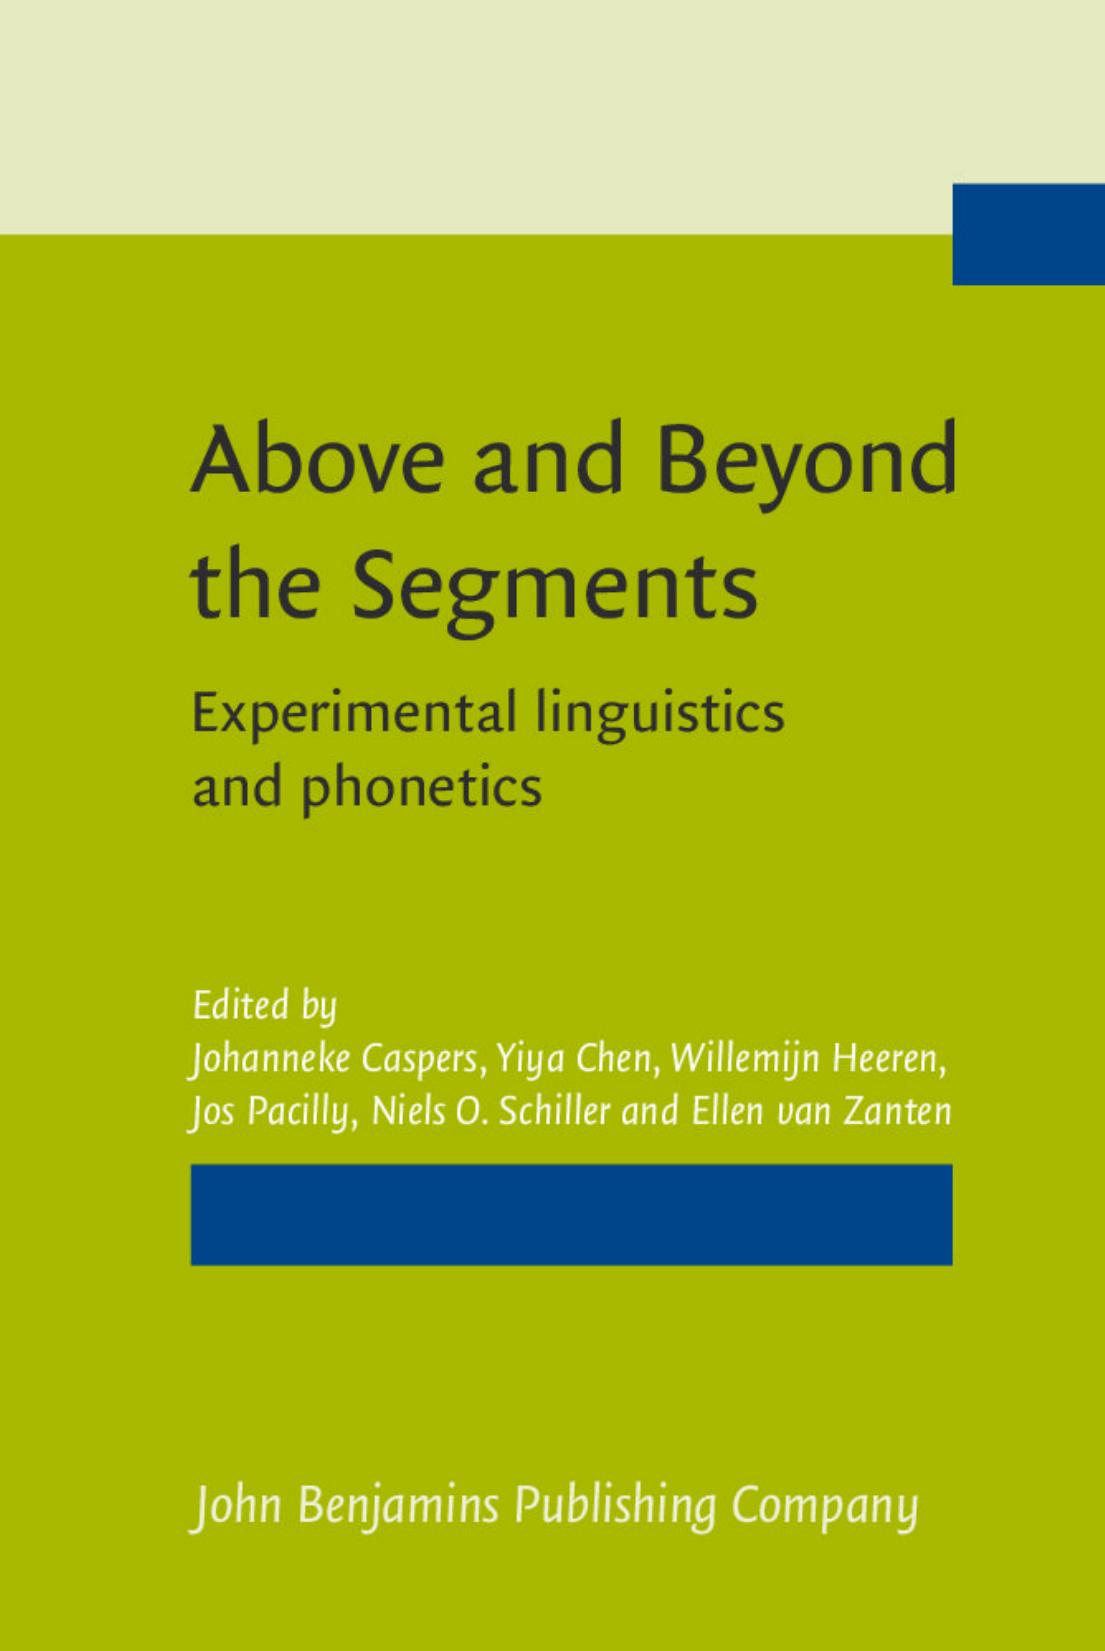 Above and Beyond the Segments: Experimental Linguistics and Phonetics